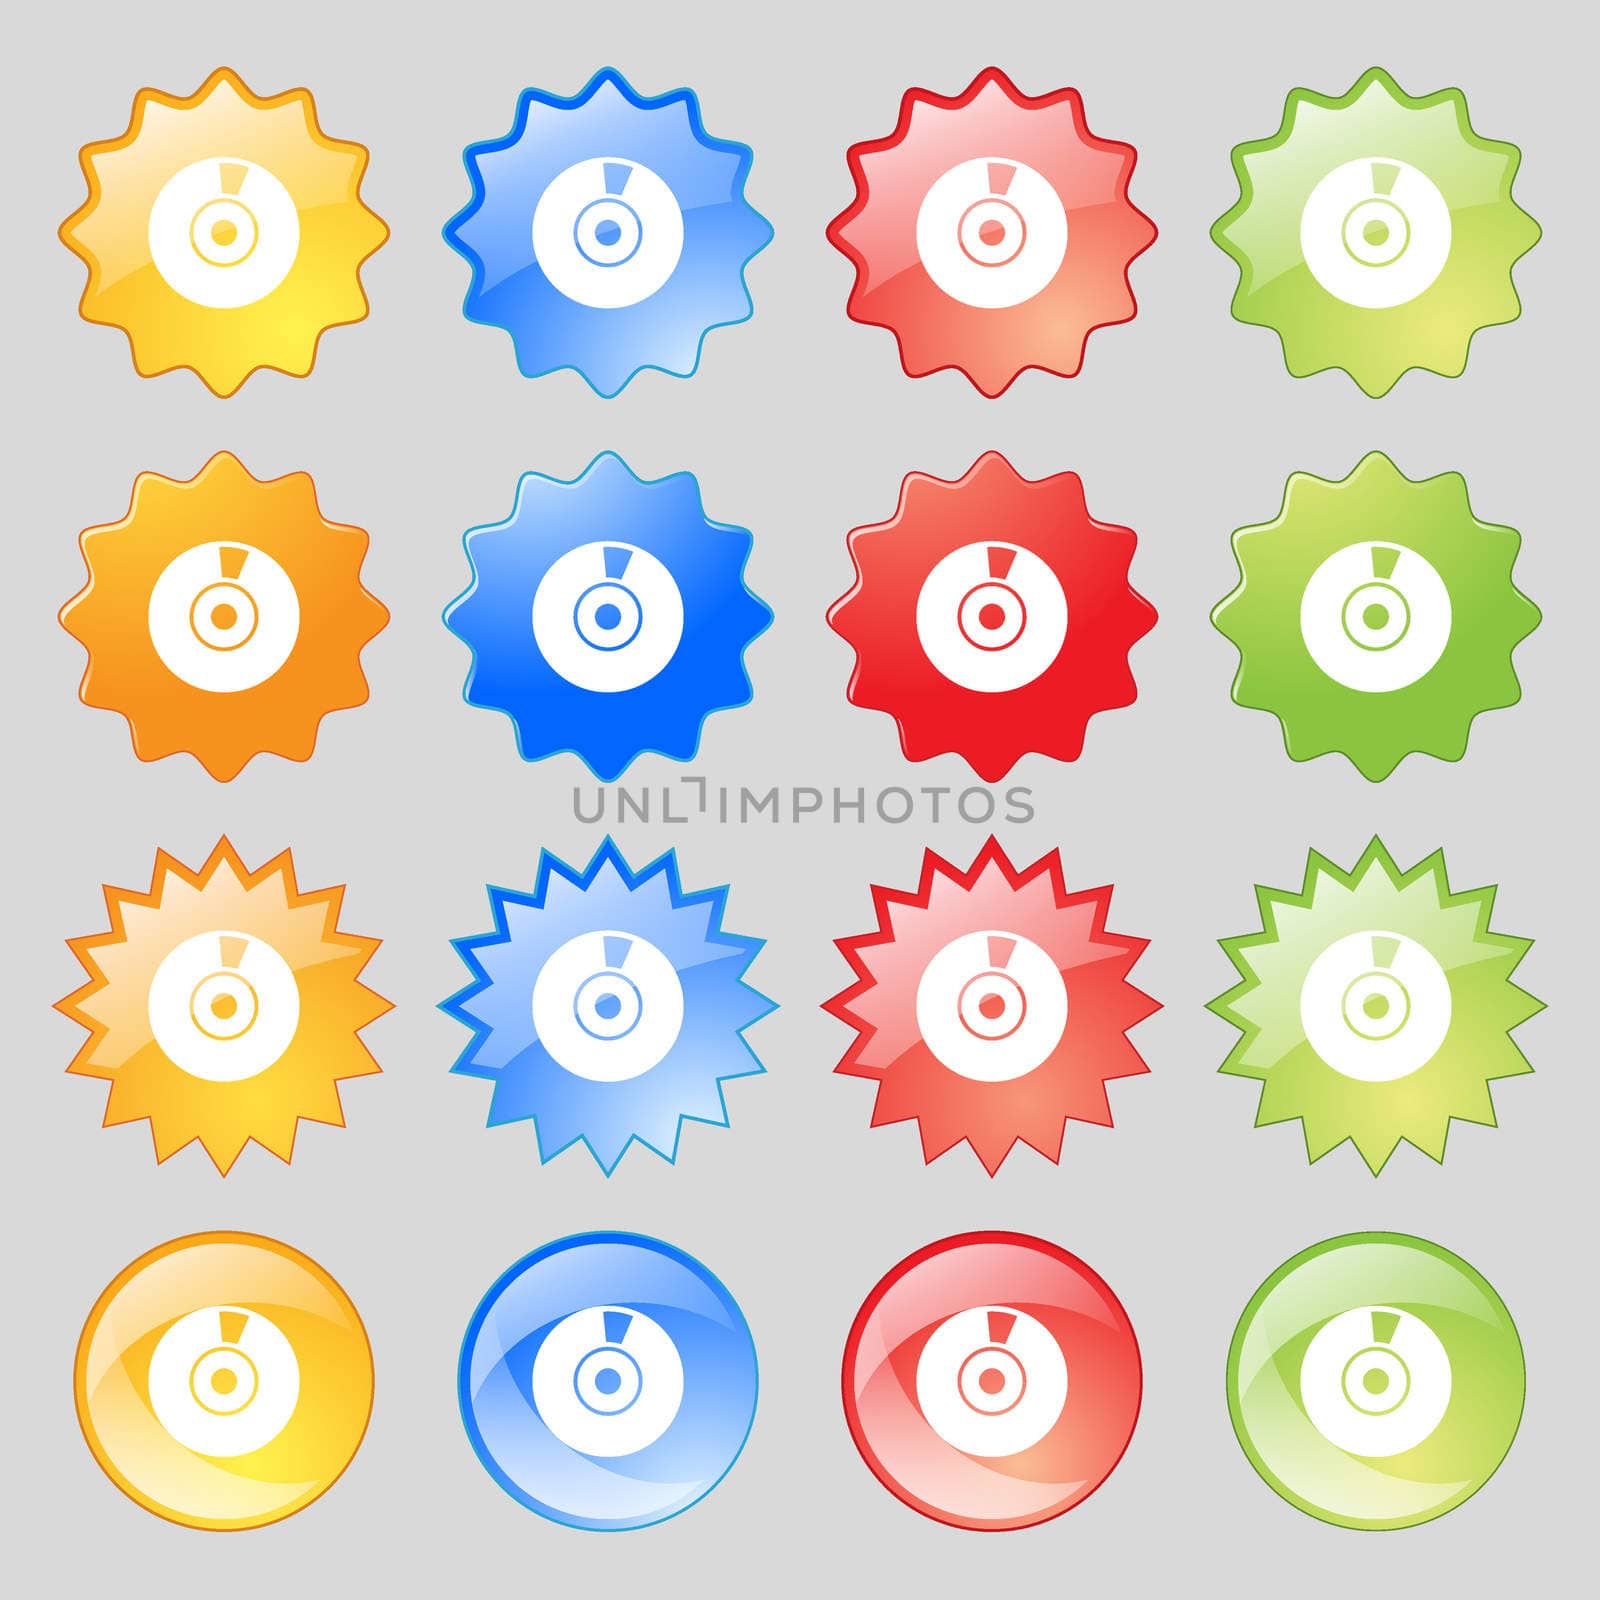 CD or DVD icon sign. Big set of 16 colorful modern buttons for your design. illustration